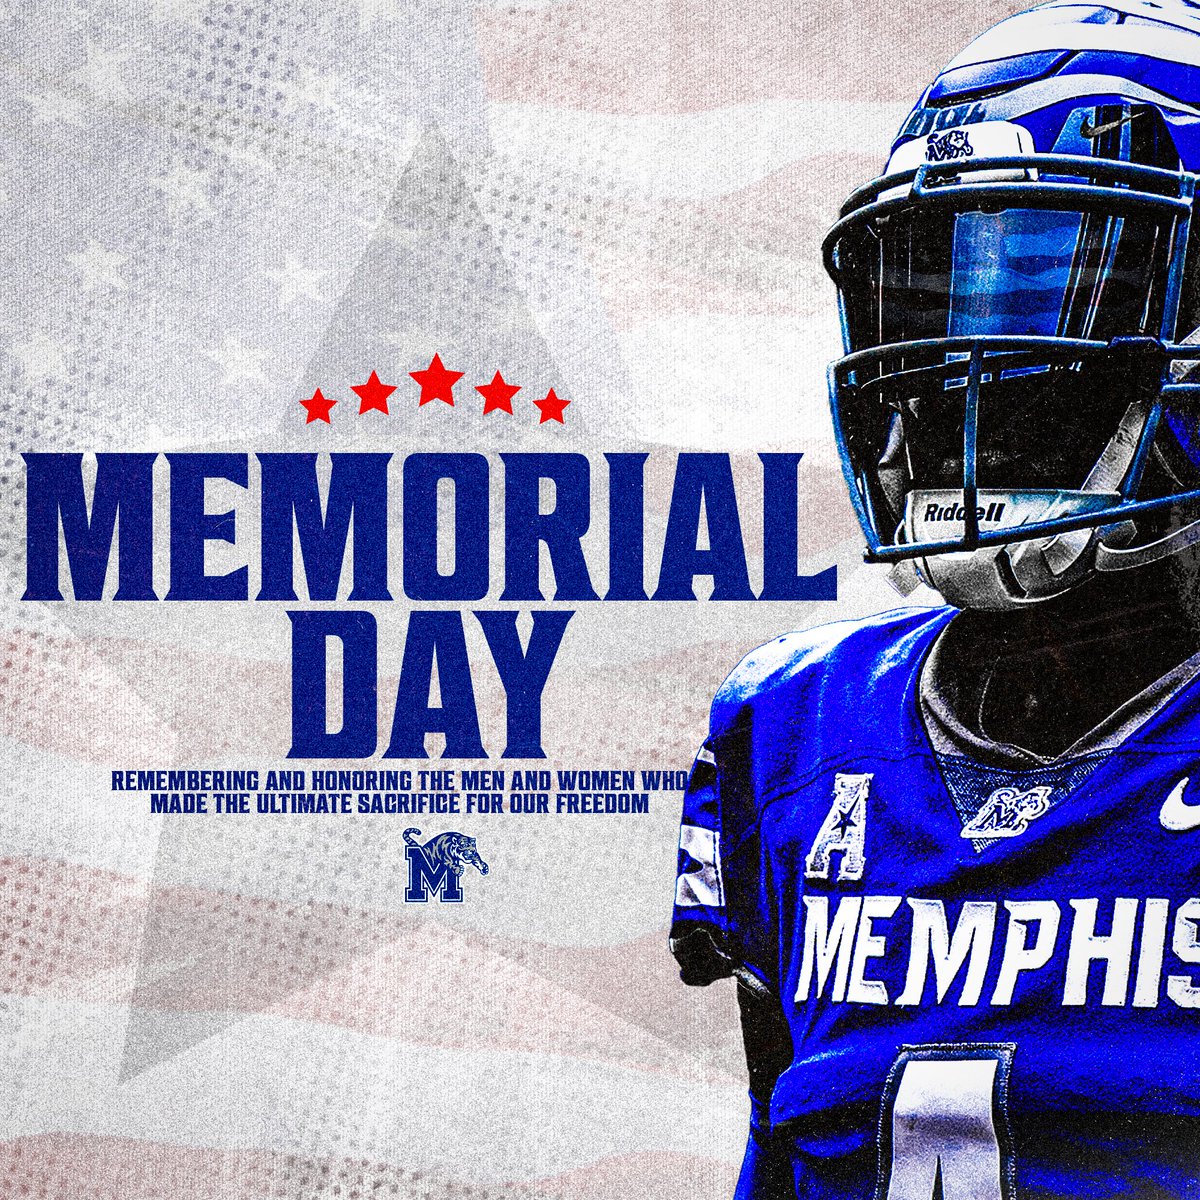 We remember and honor those who made the ultimate sacrifice to protect our nation's freedoms. 🇺🇸